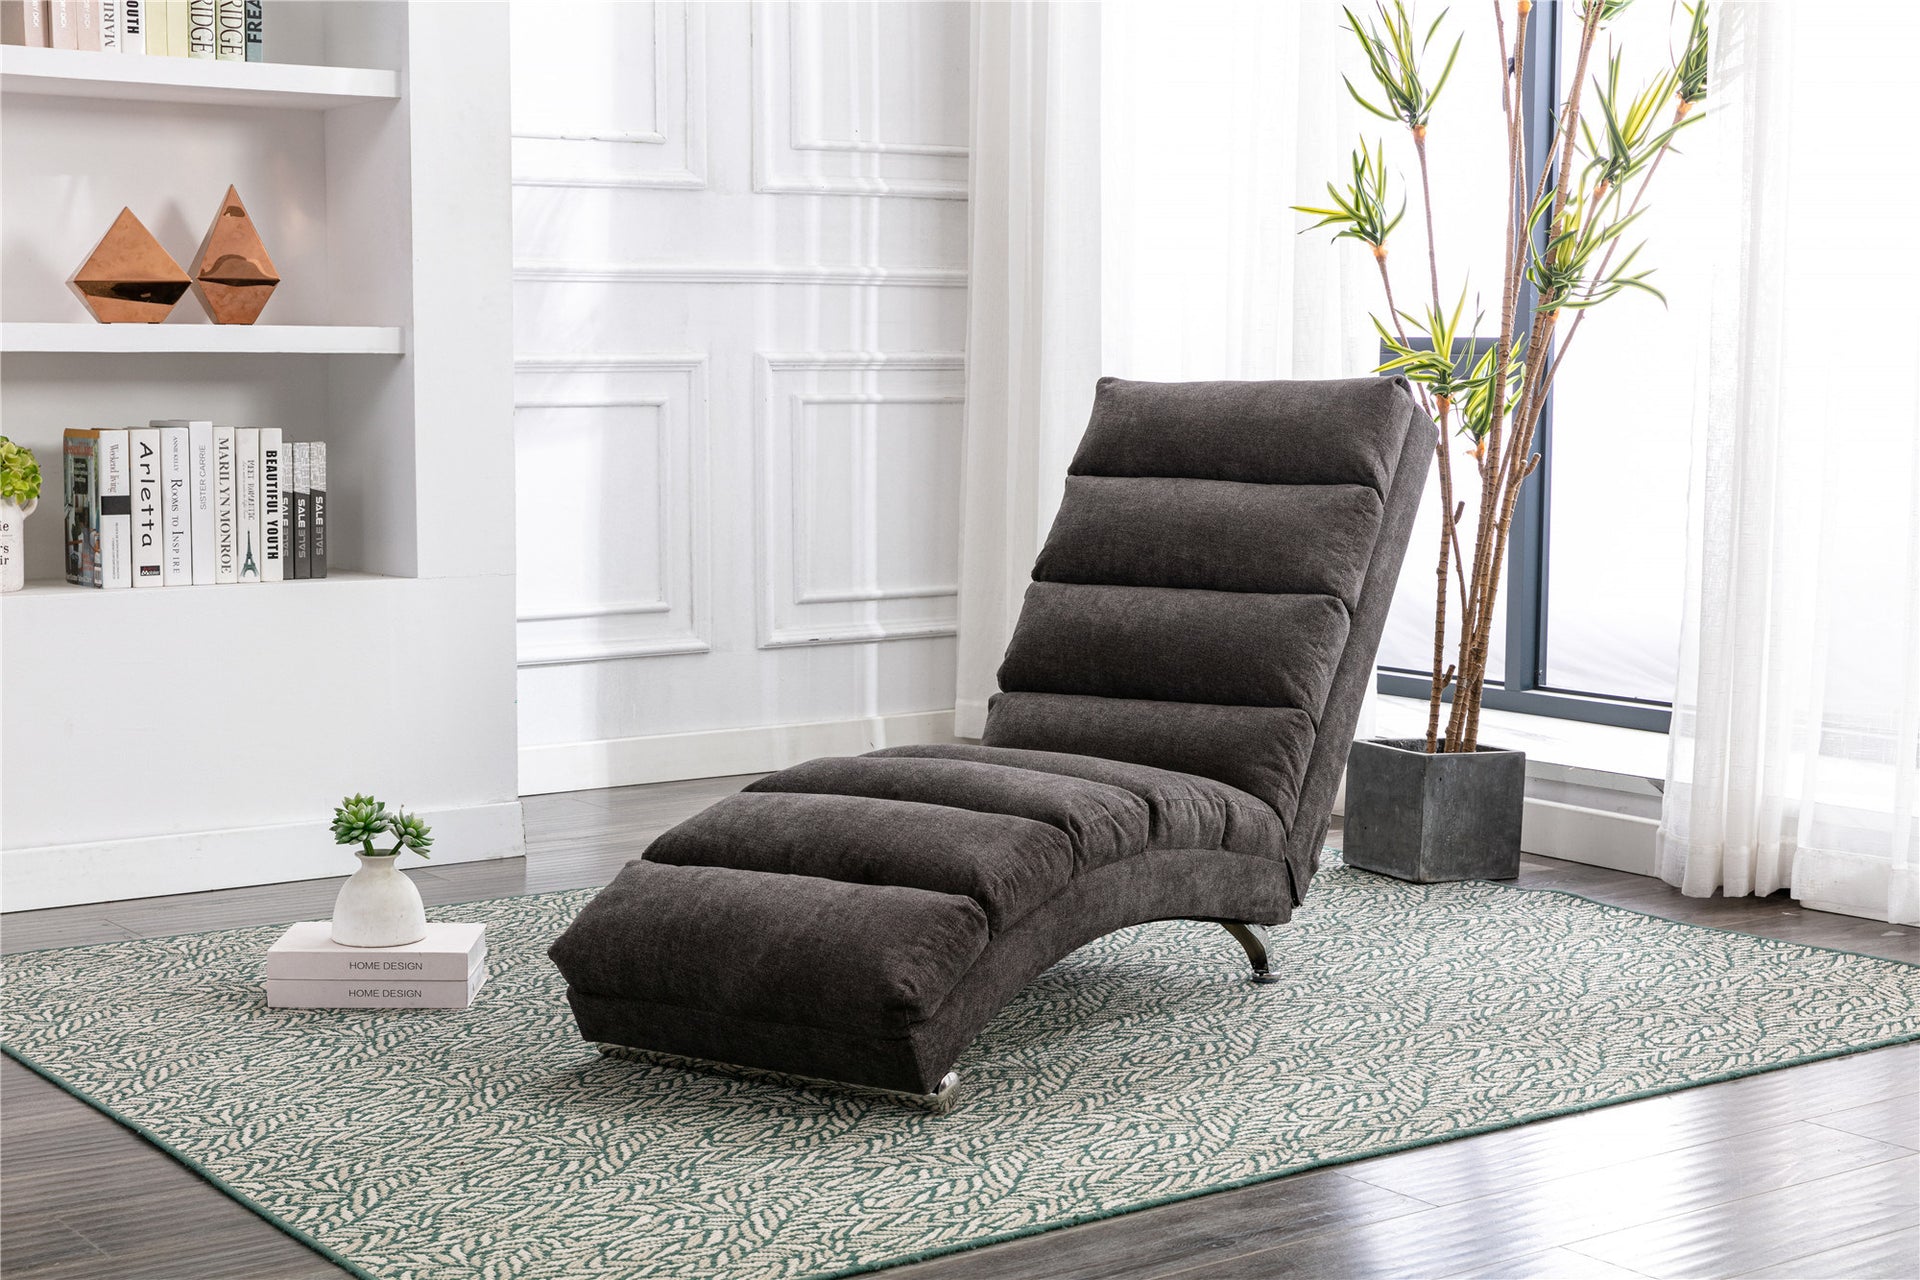 Linen Chaise Lounge Indoor Chair; Modern Long Lounger for Office or Living Room